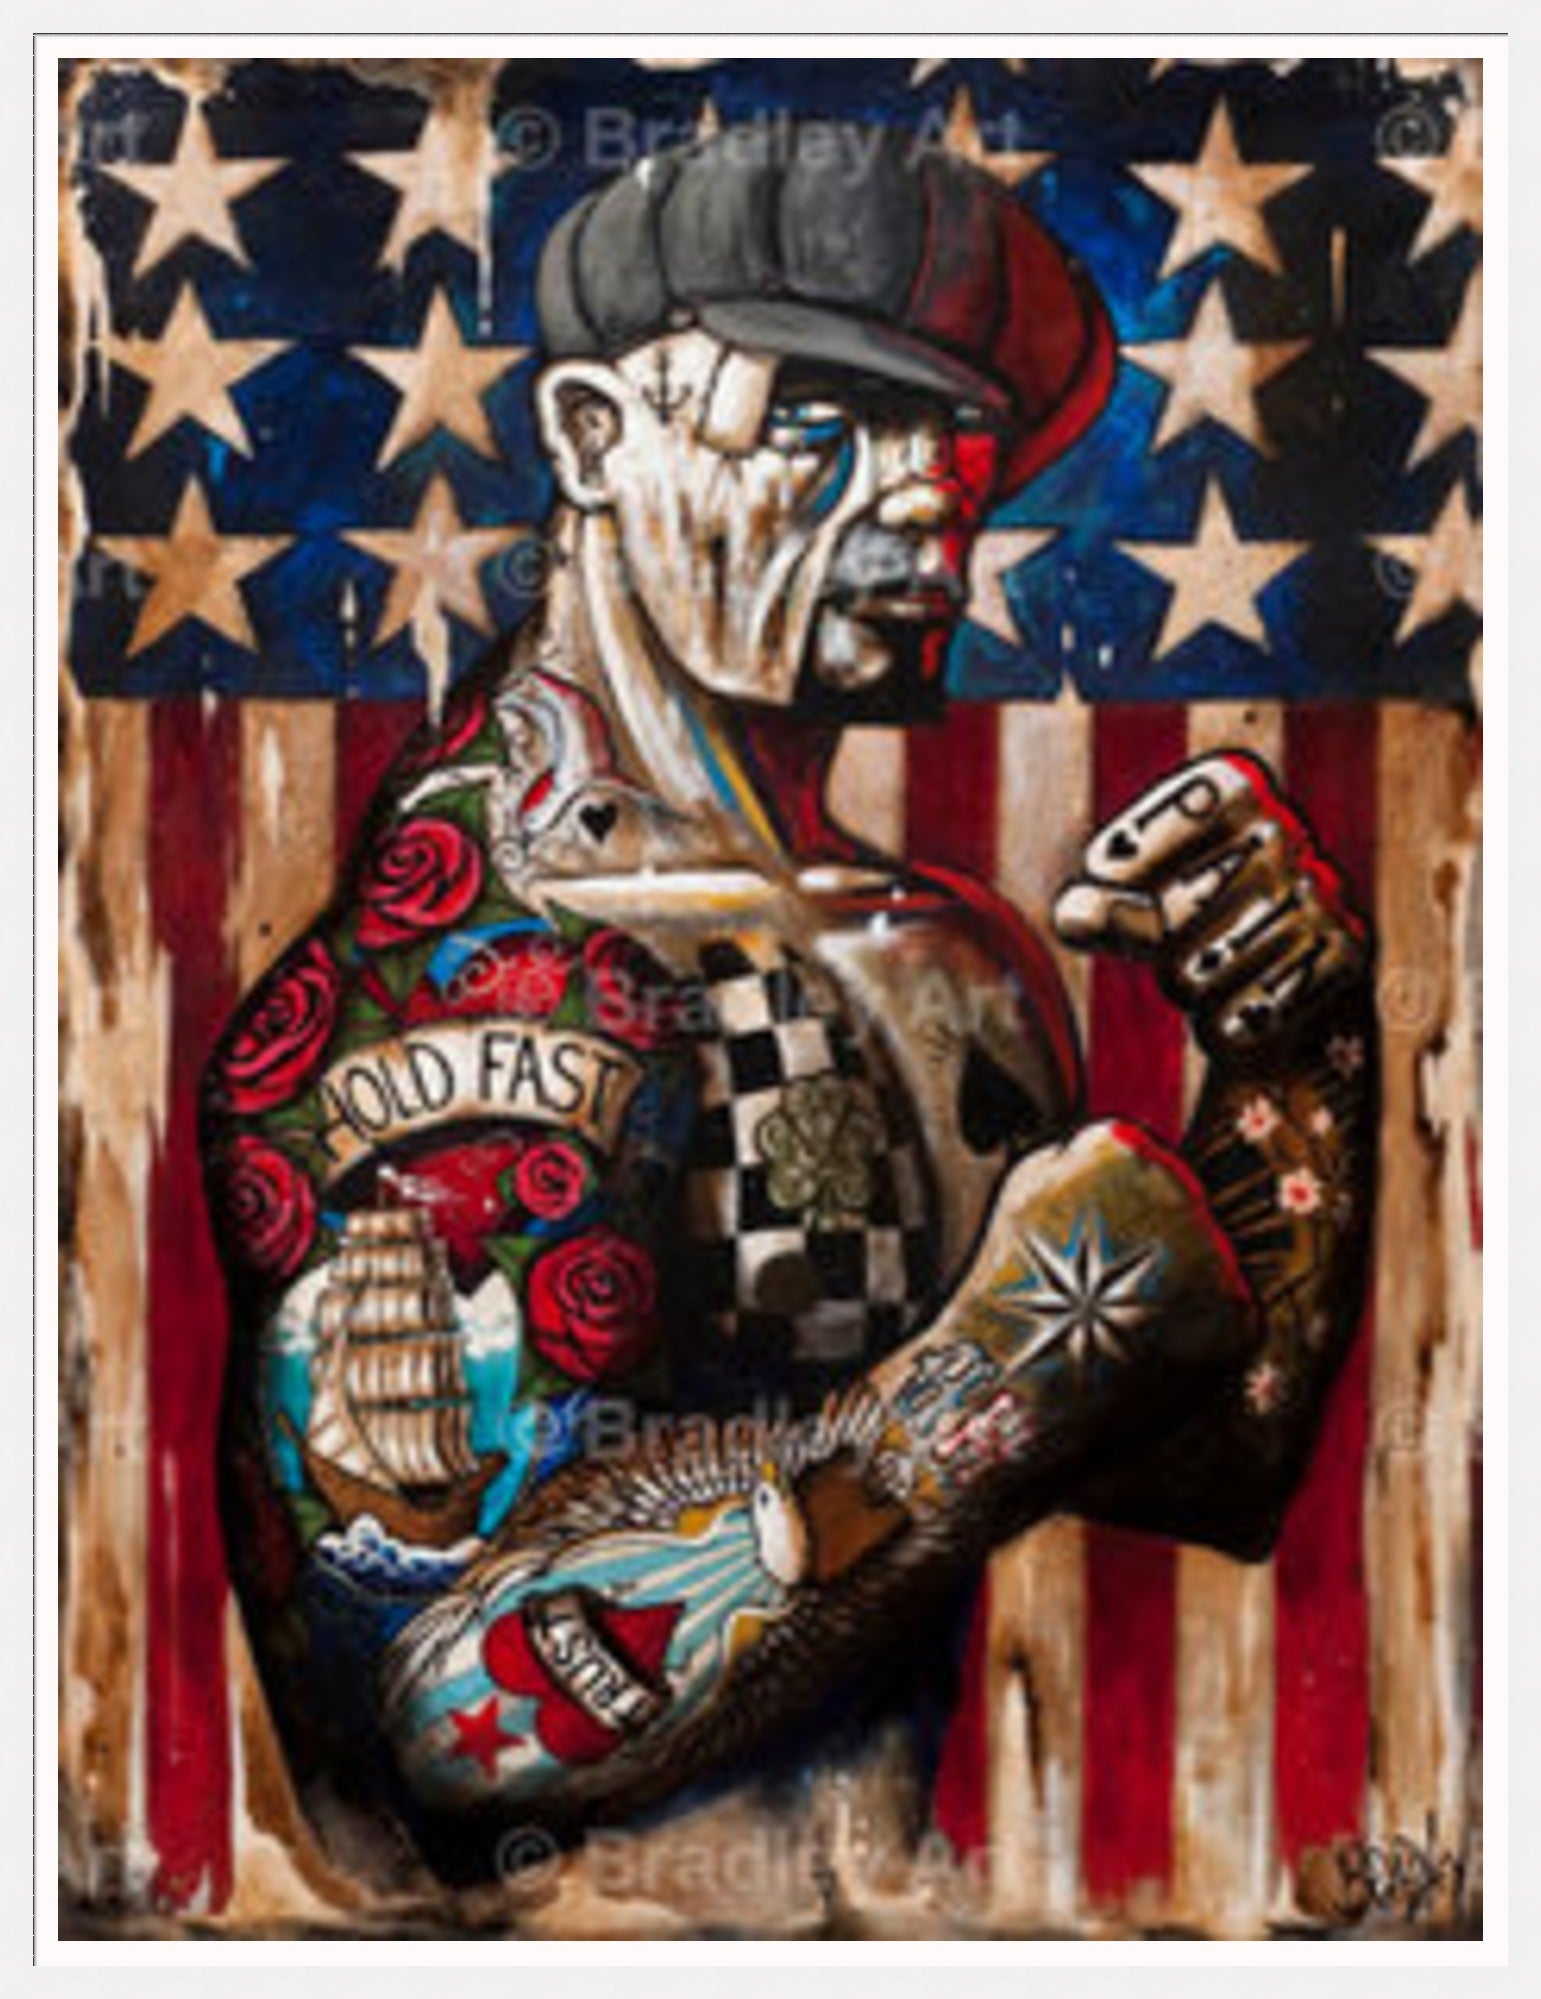 "Hold Fast for Harley Davidson" Canvas